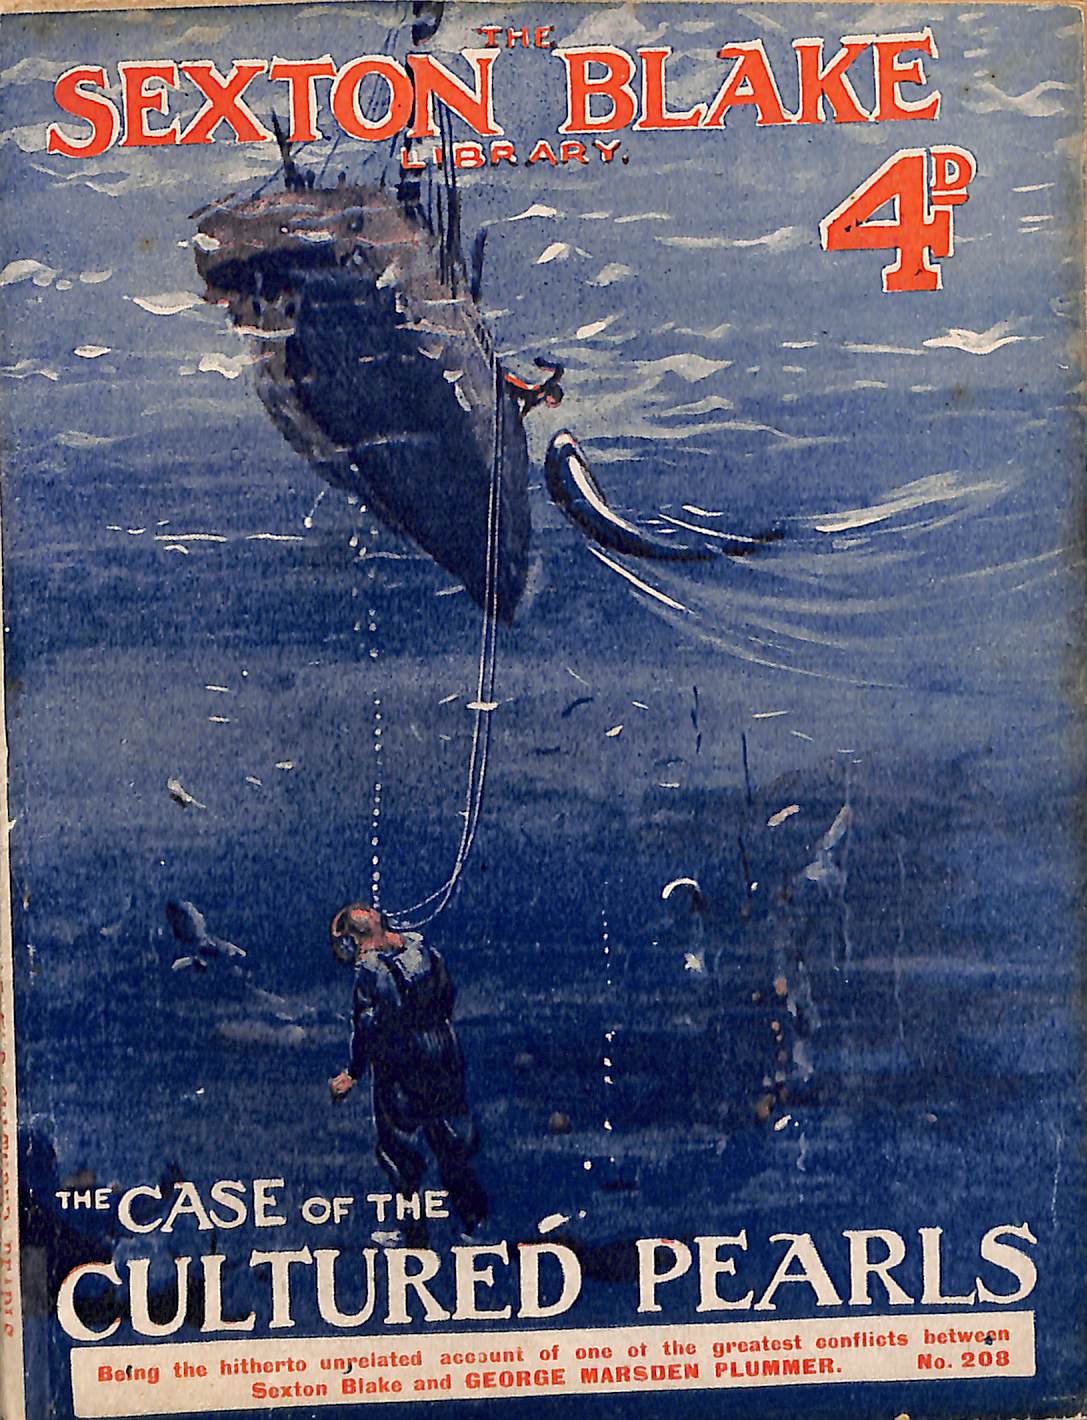 Book Cover For Sexton Blake Library S1 208 - The Case of the Cultured Pearls